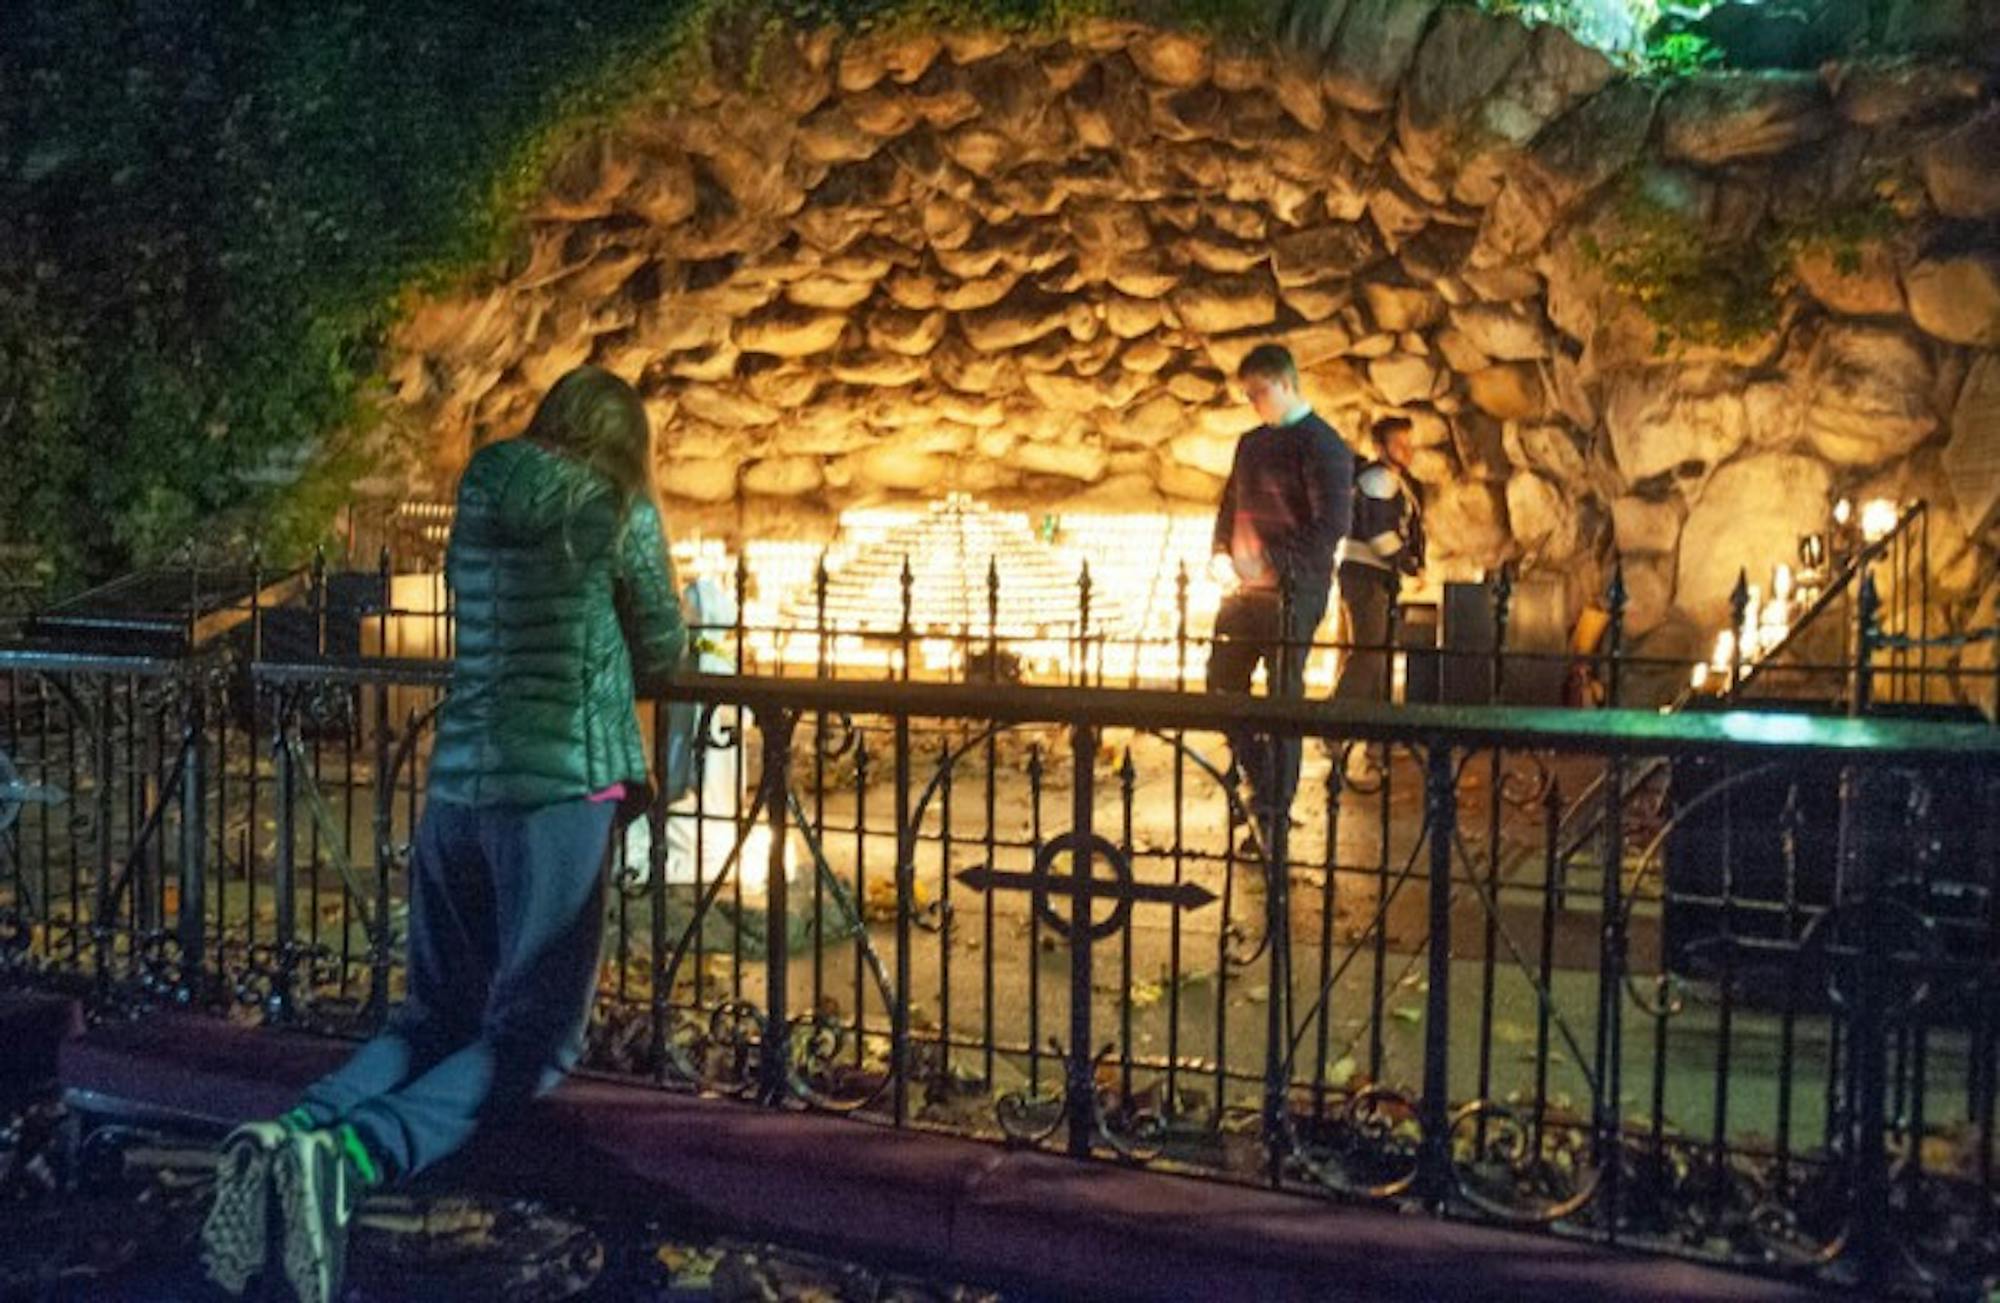 Many students gathered at the Grotto throughout the night to reflect on the night's results.